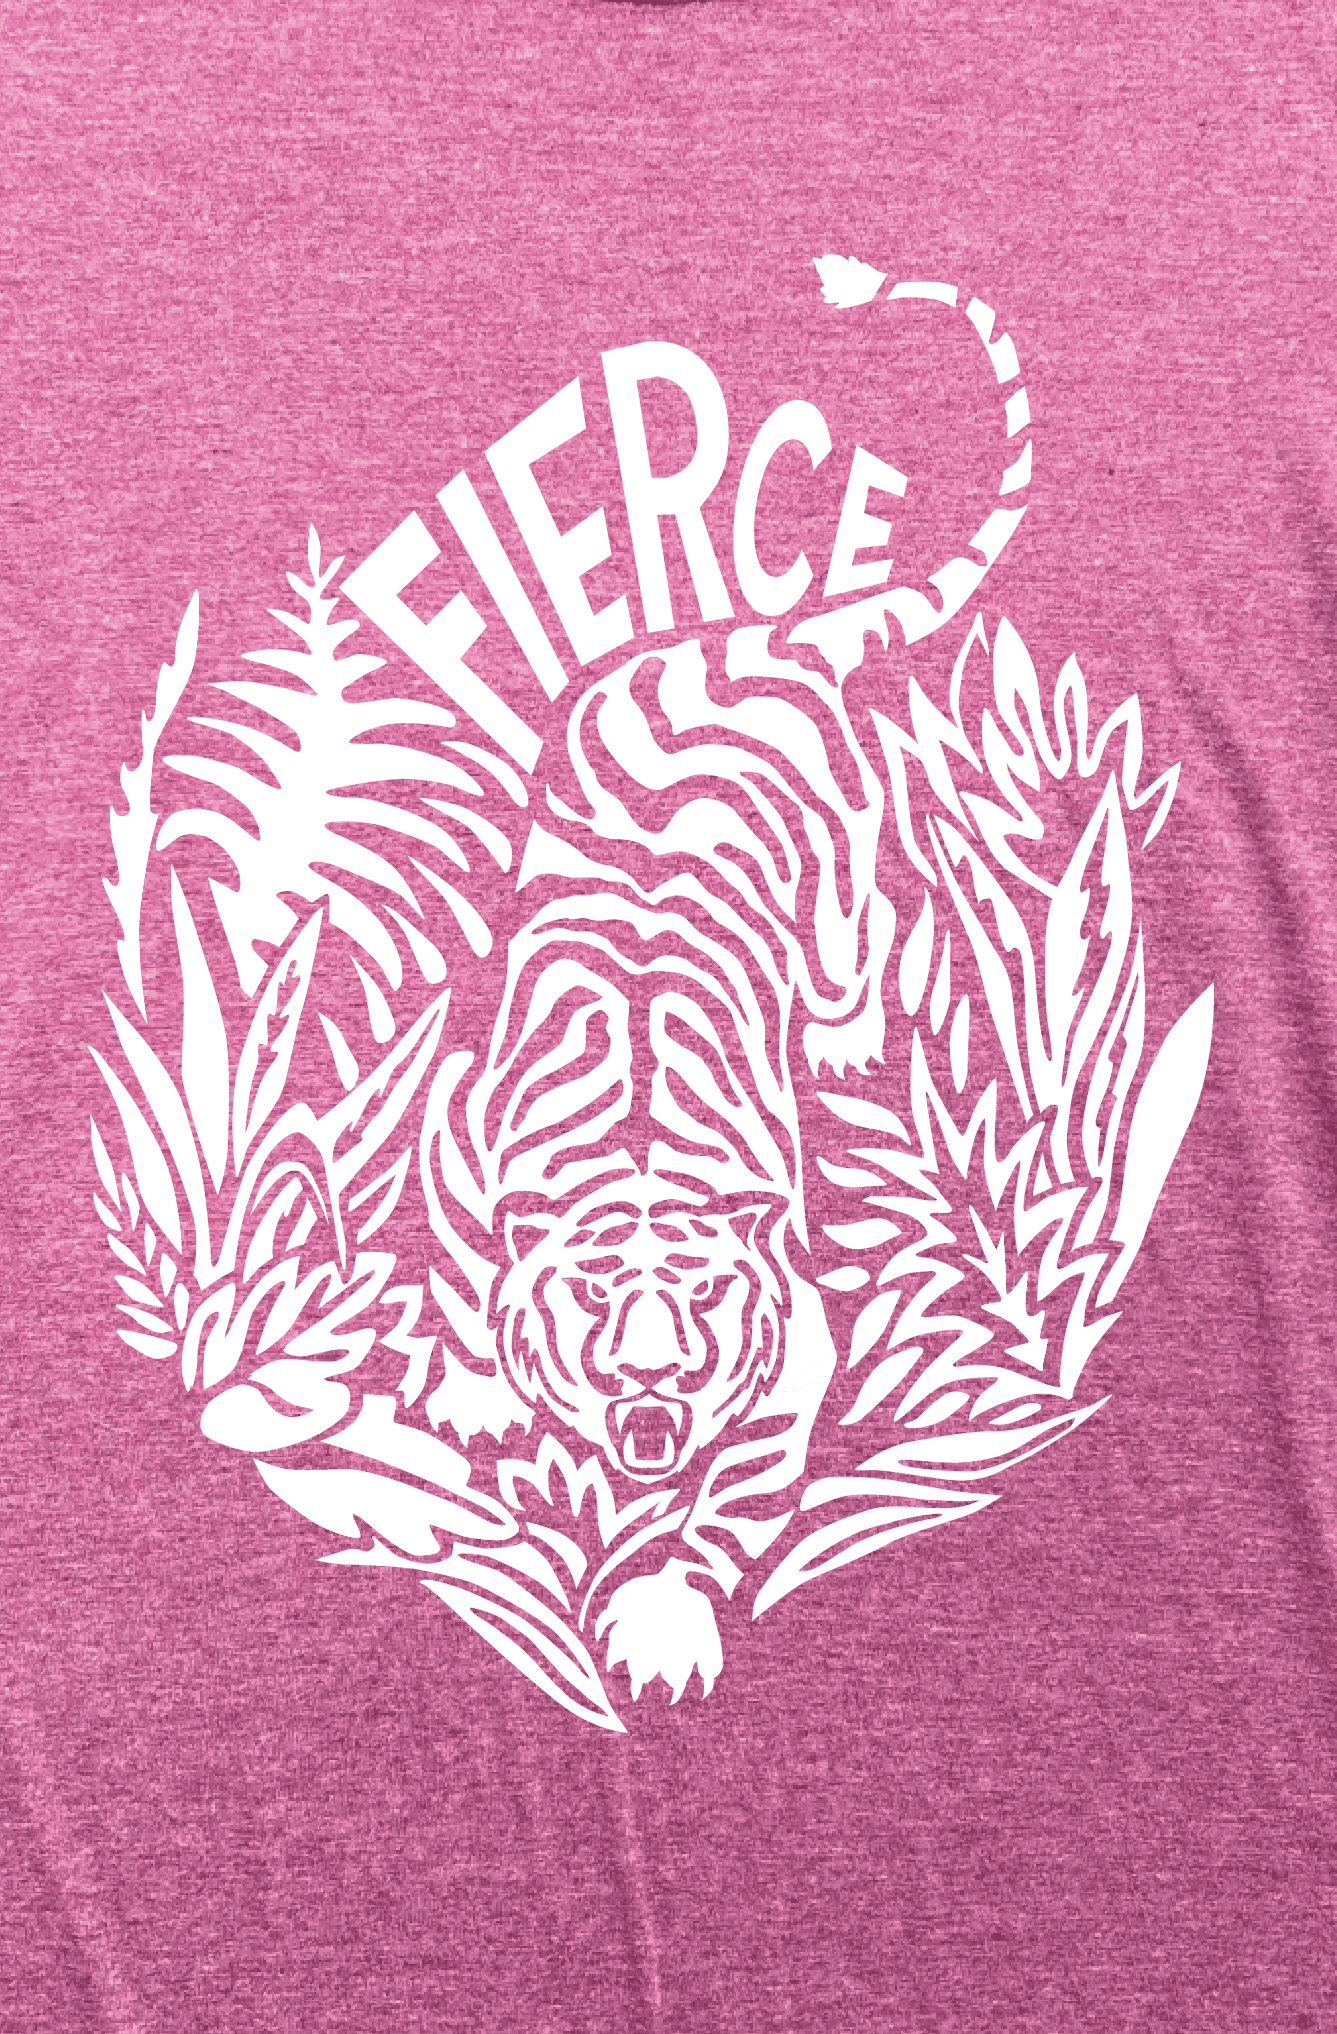 Graphic of a tiger in a white print on a maroon melange shirt